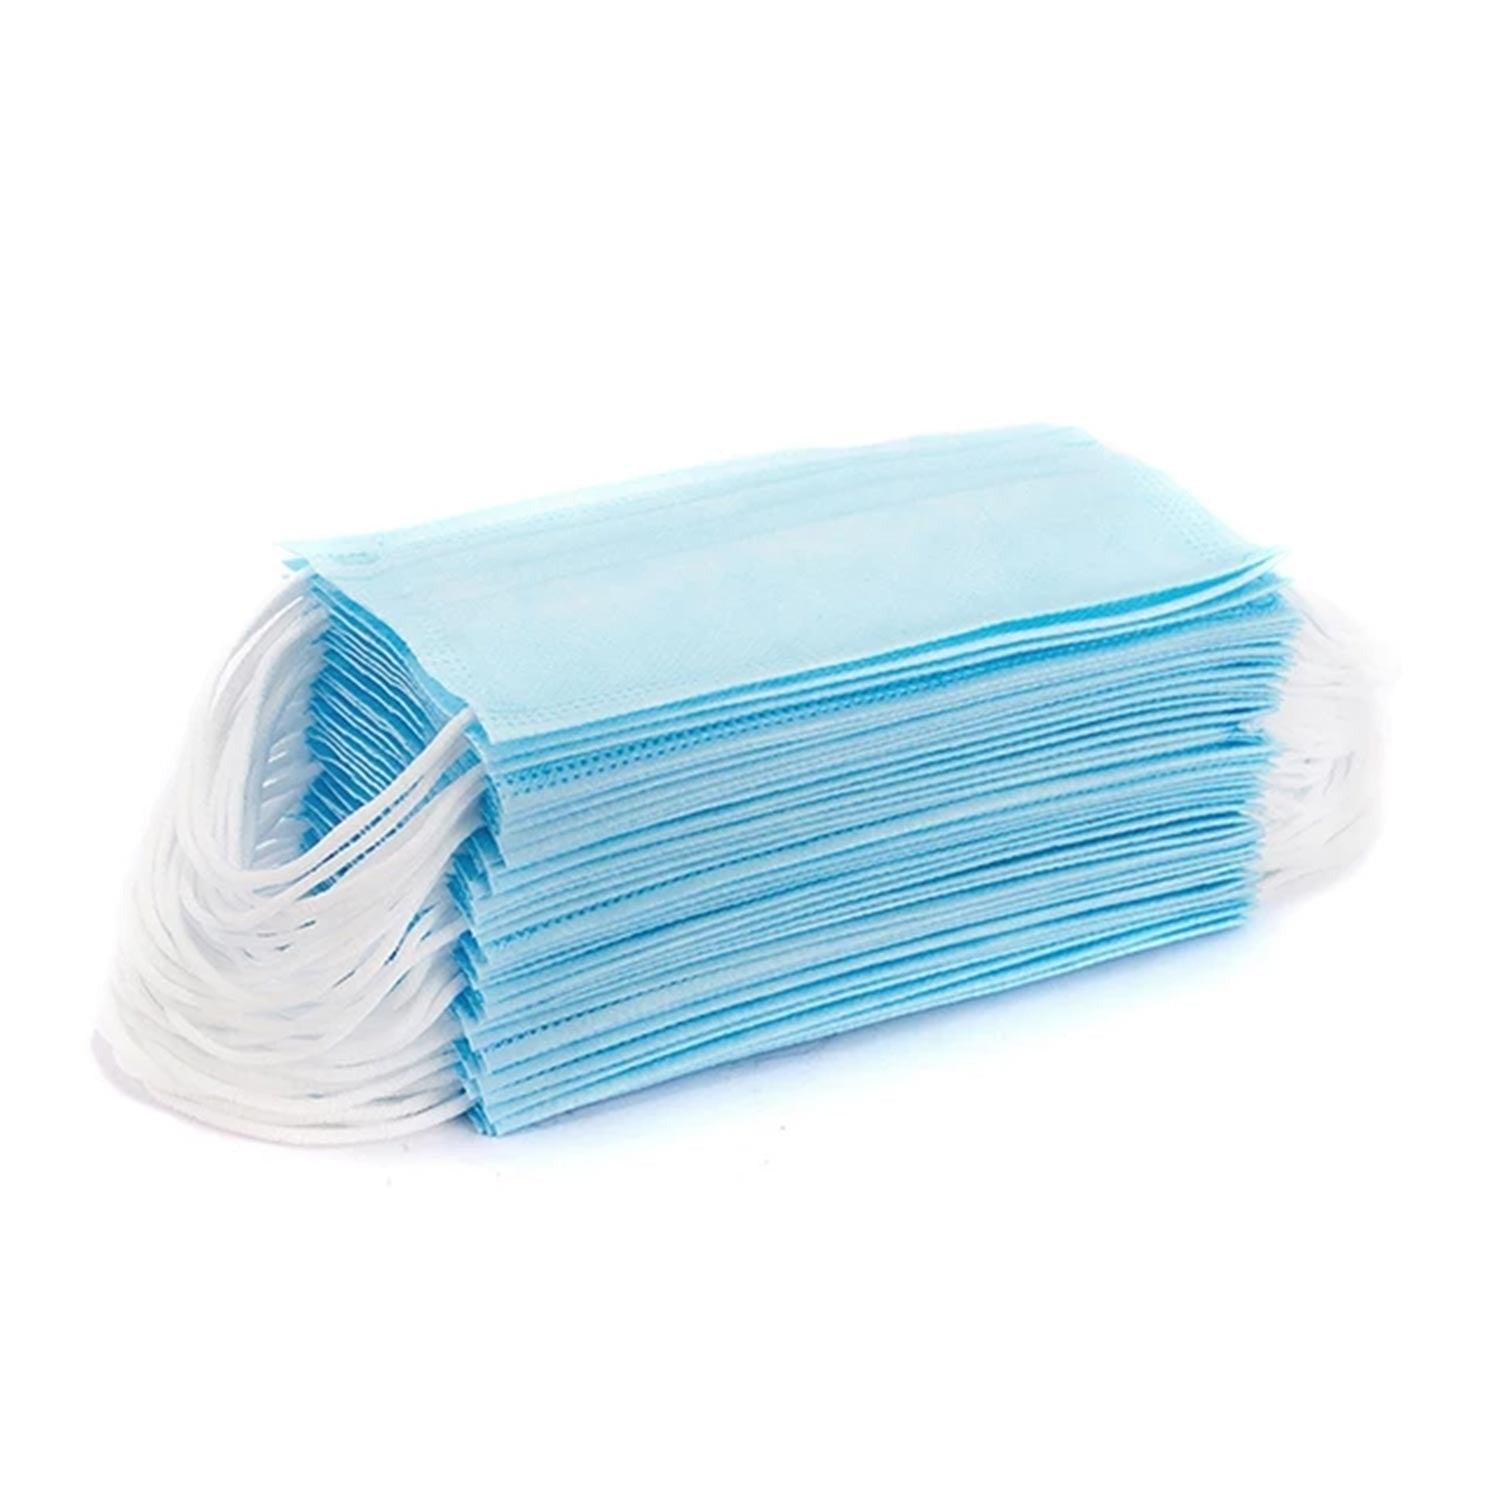 Special Clearance - Disposable face Masks box 50 - Anjelstore 